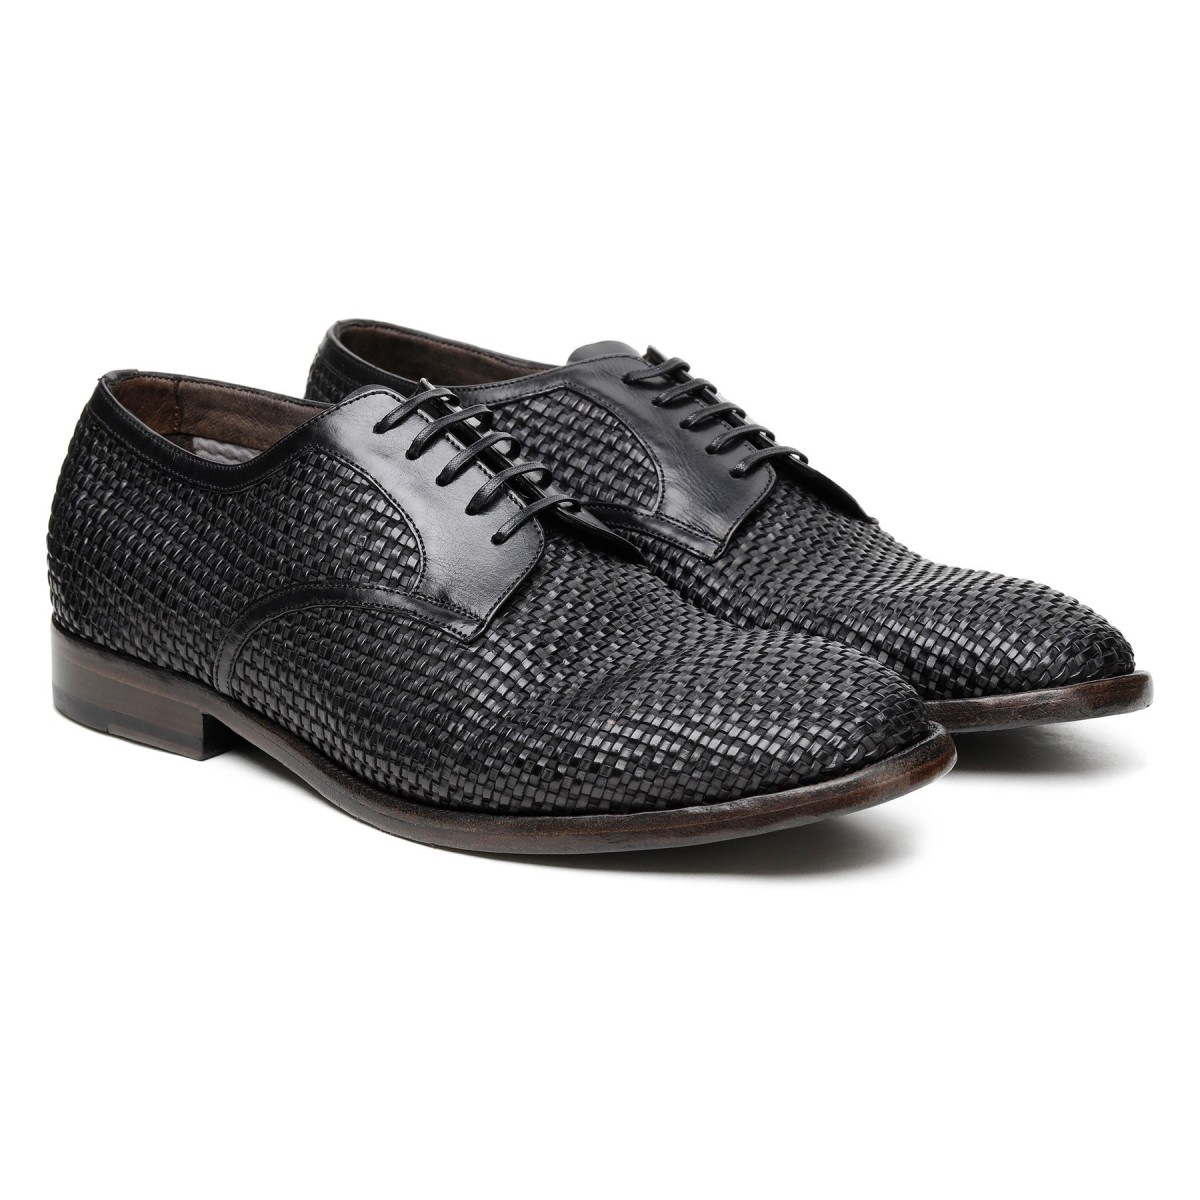 Black woven leather Derby shoes